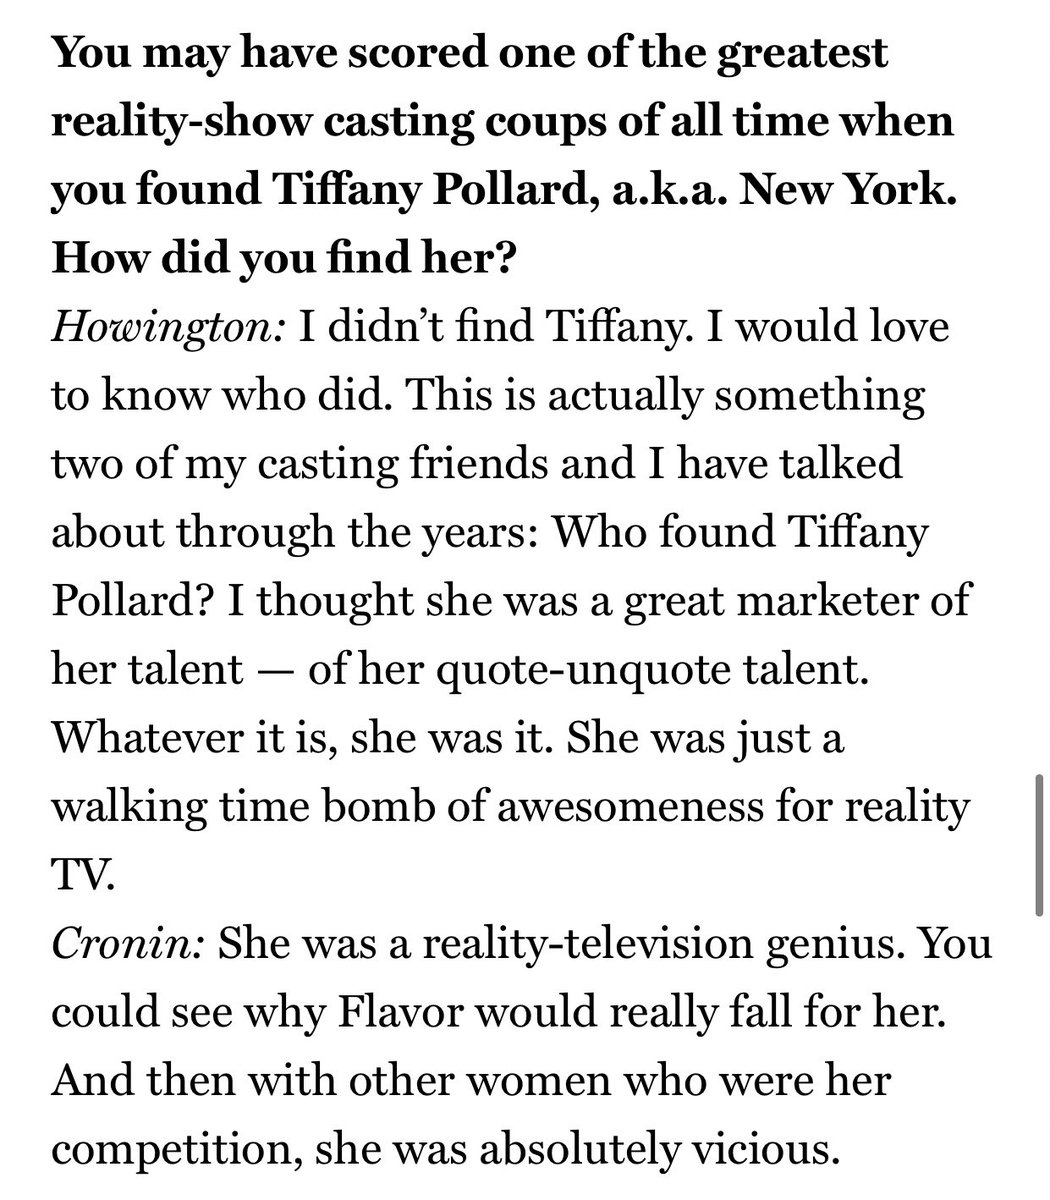 I can’t find the original article I read years ago but here’s a piece from a 2014 article where one of the casting directors was interviewed lol